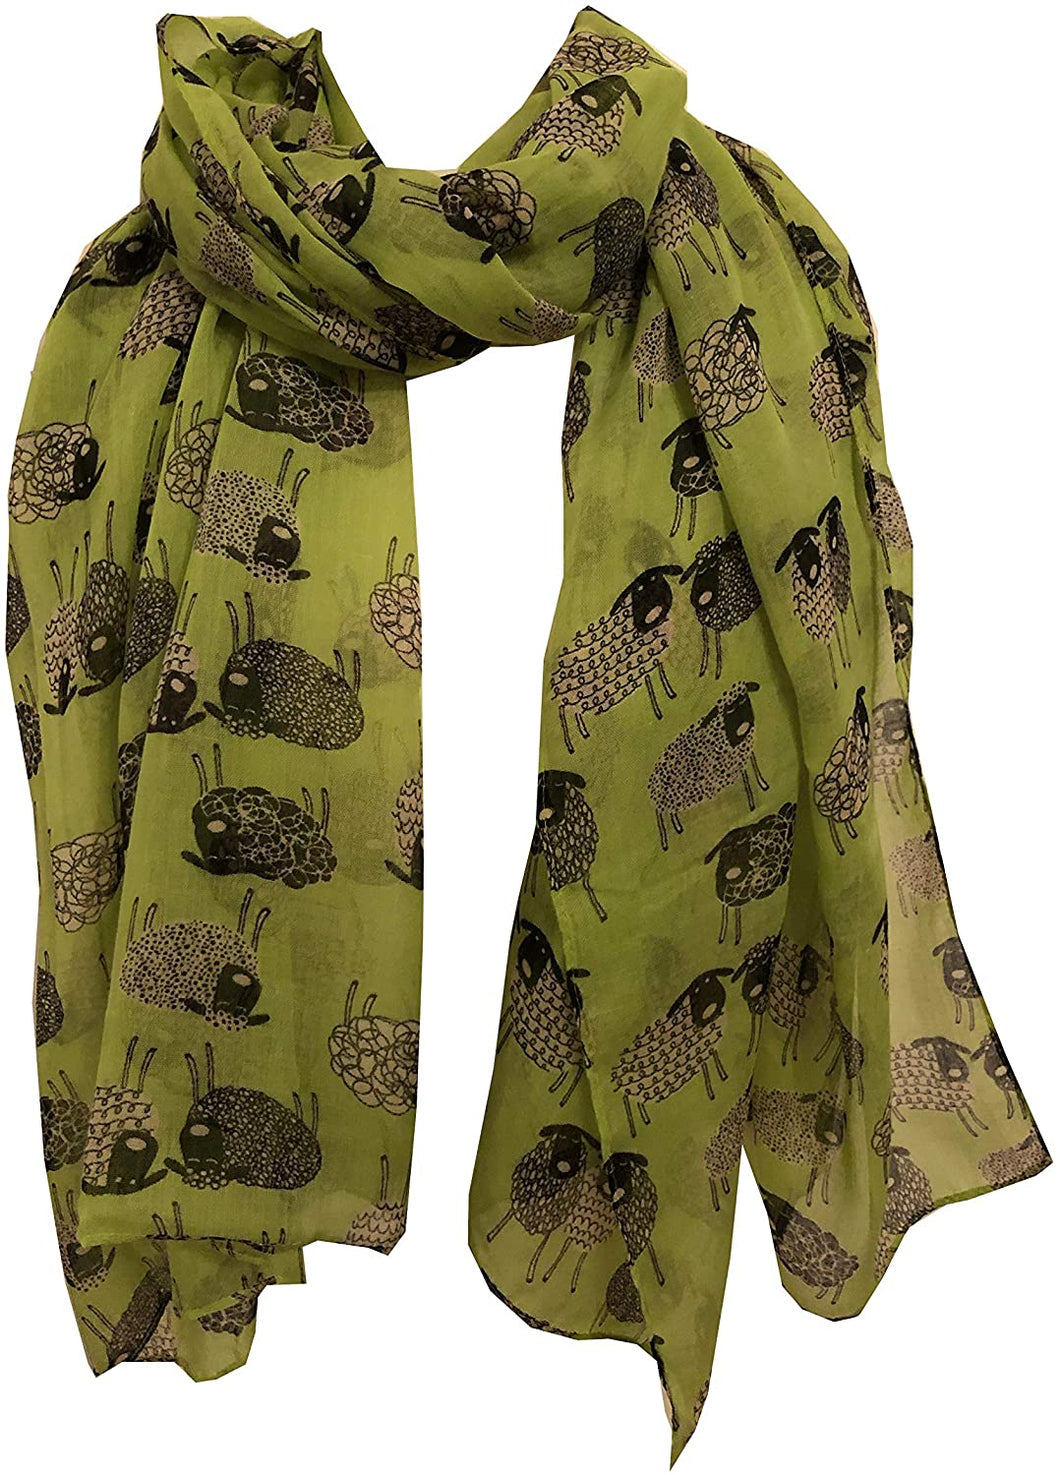 Pamper Yourself Now Light Green Sketched Sheep Design Long Scarf, Soft Ladies Fashion London